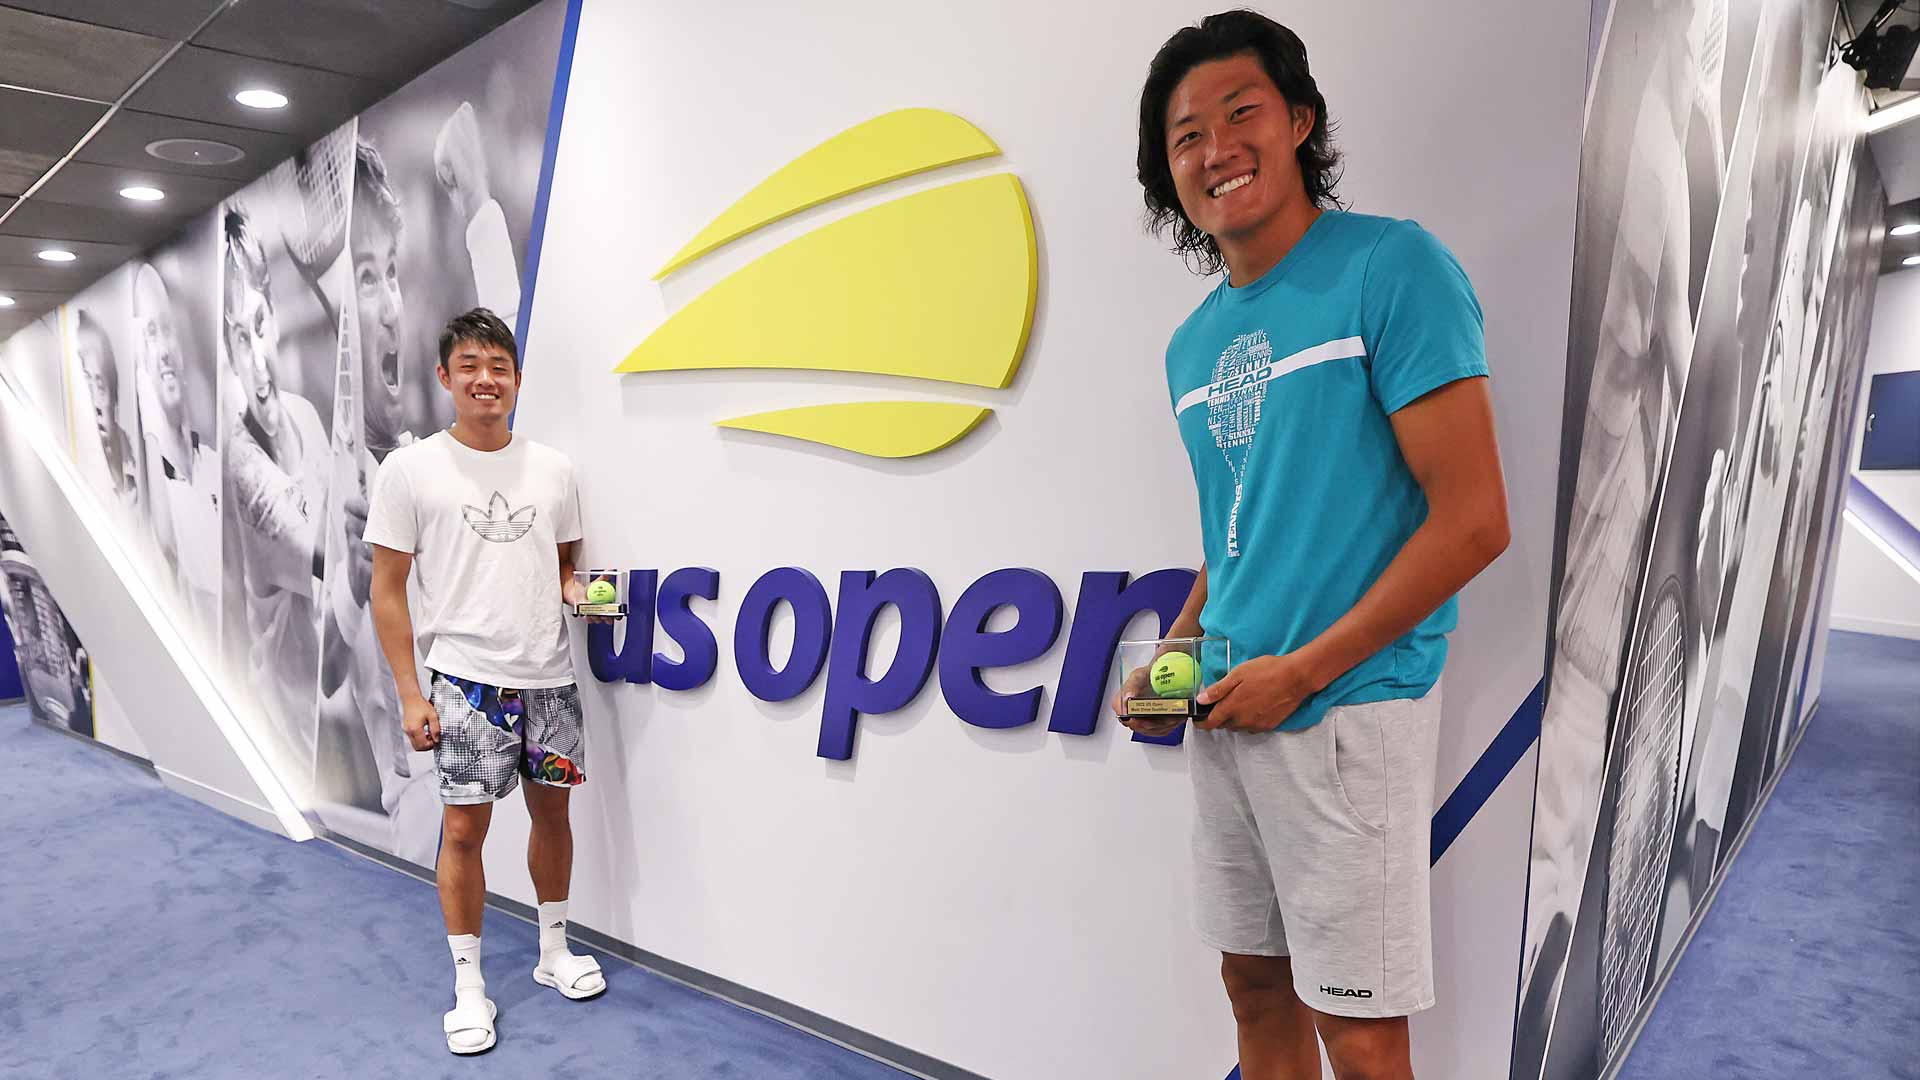 Wu Yibing and Zhang Zhizhen celebrate their qualification for the <a href='https://www.atptour.com/en/tournaments/us-open/560/overview'>US Open</a>.